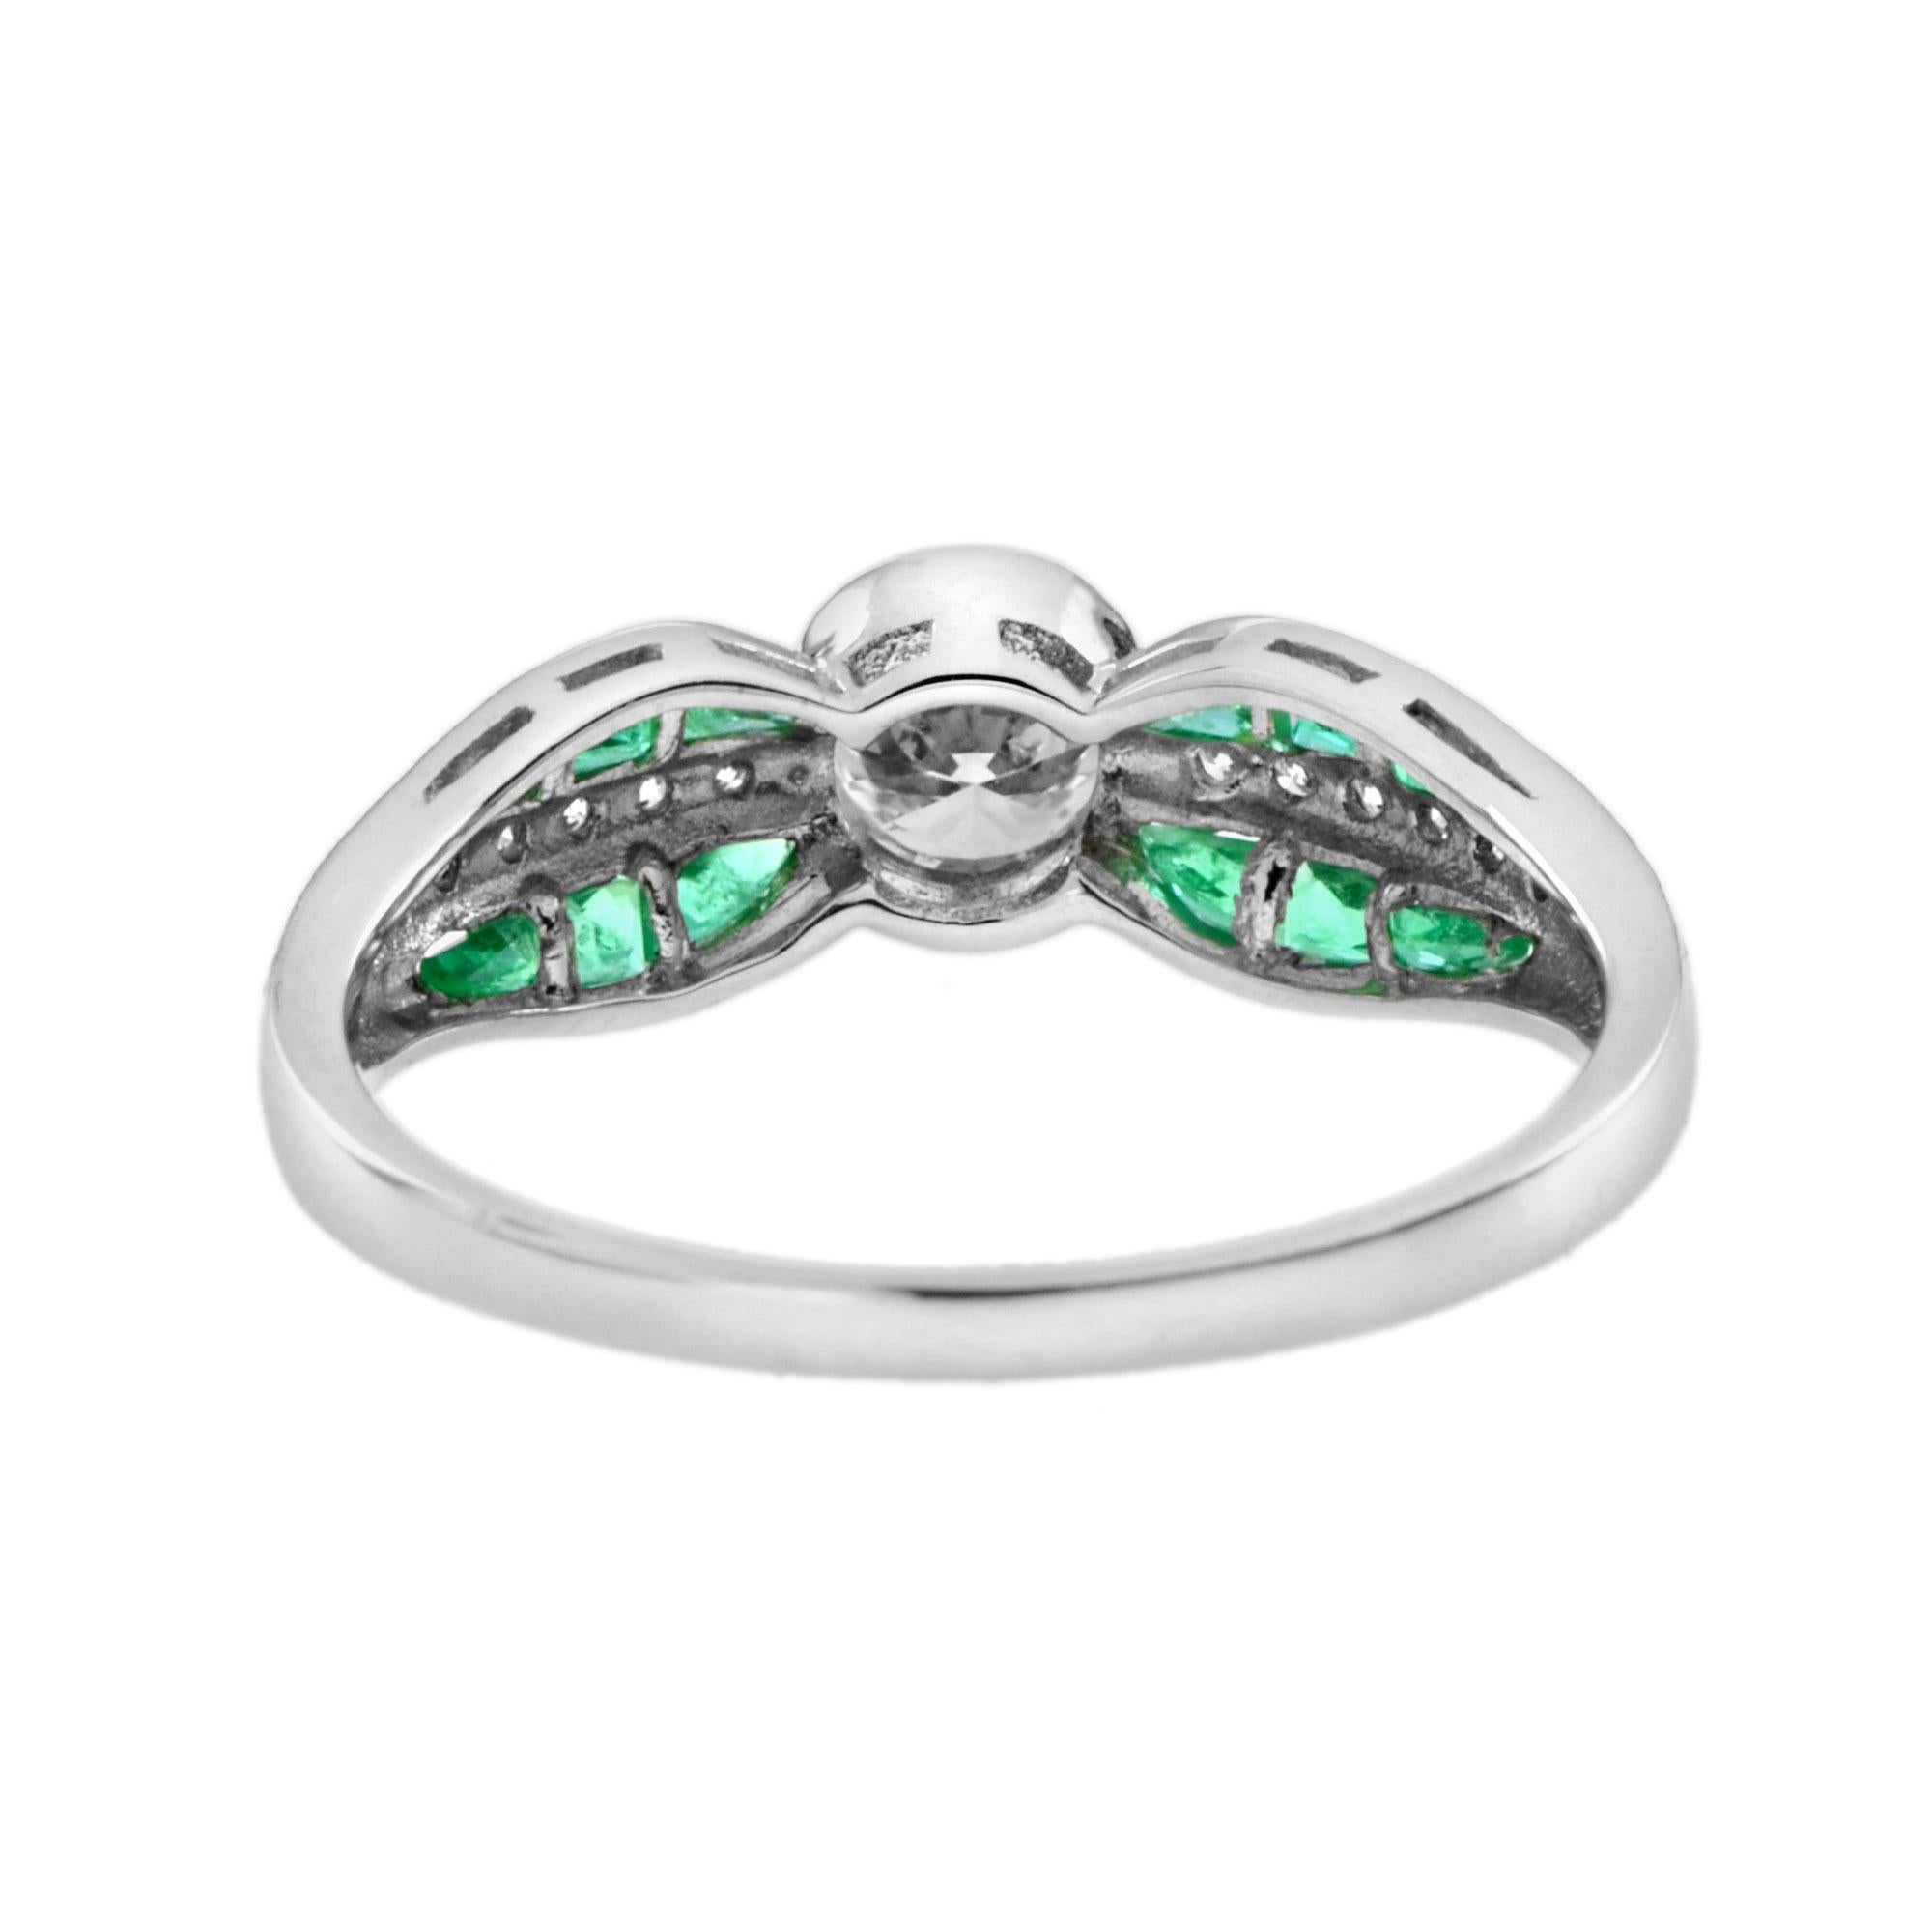 For Sale:  Diamond and Emerald Art Deco Style Solitaire Ring in 18K White Gold 5